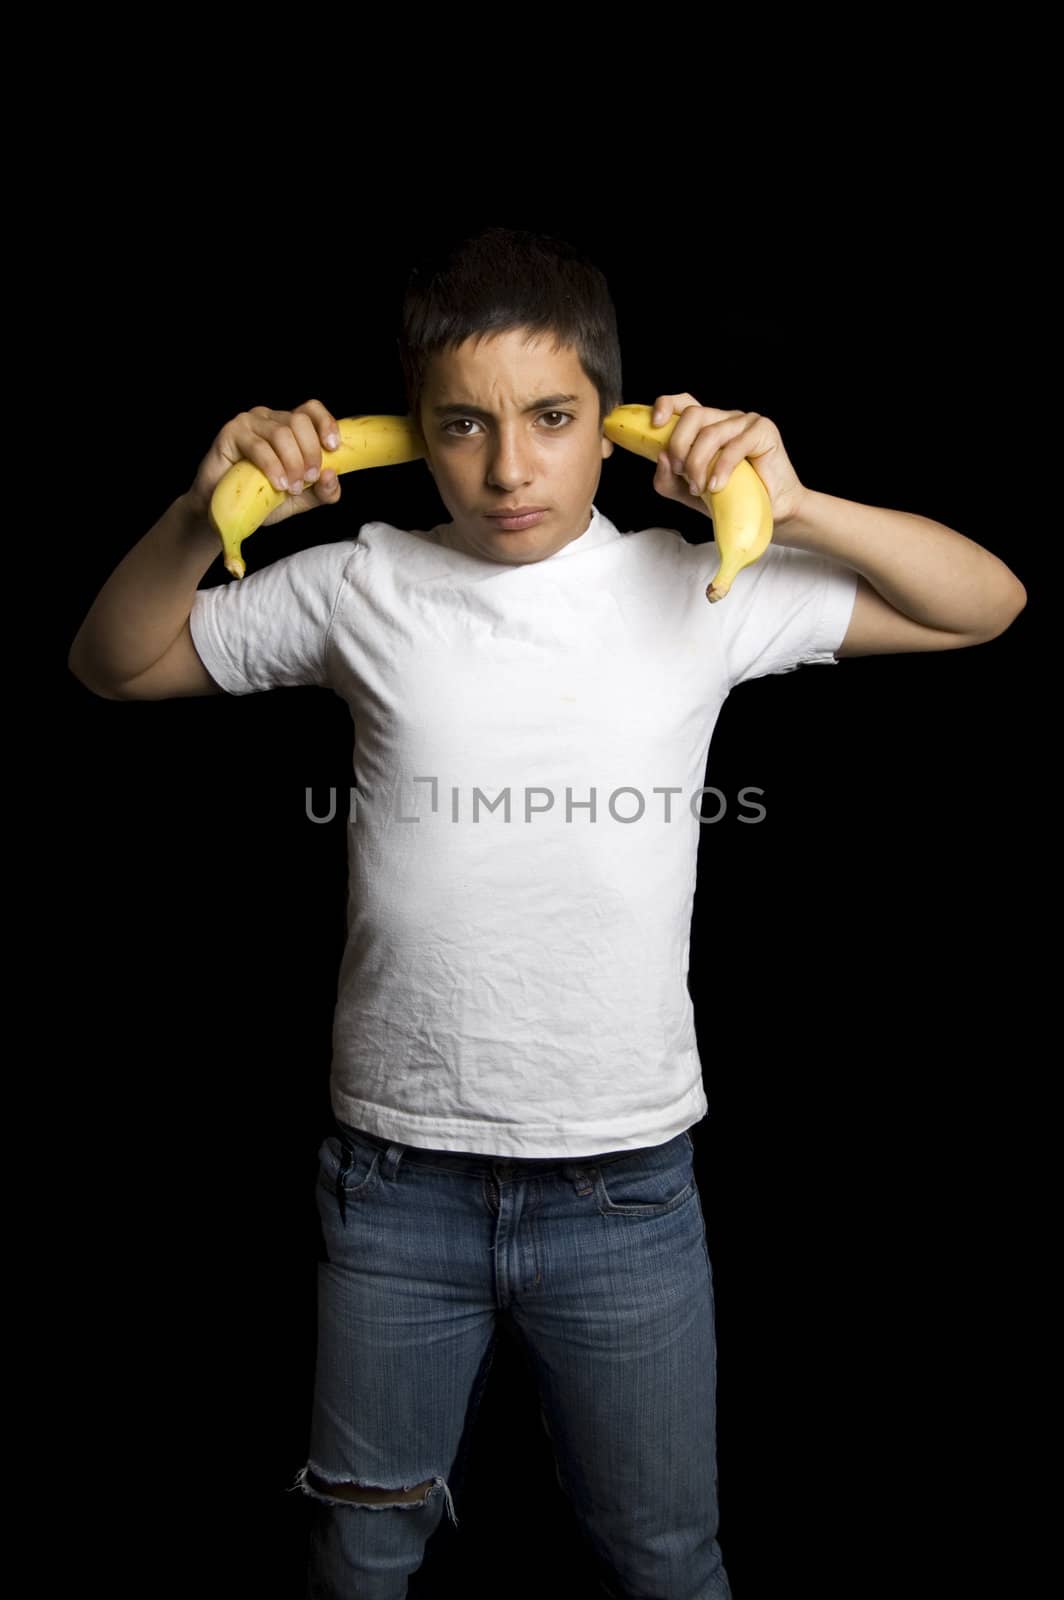 teenage boy cannot hear you because of bananas in his ears